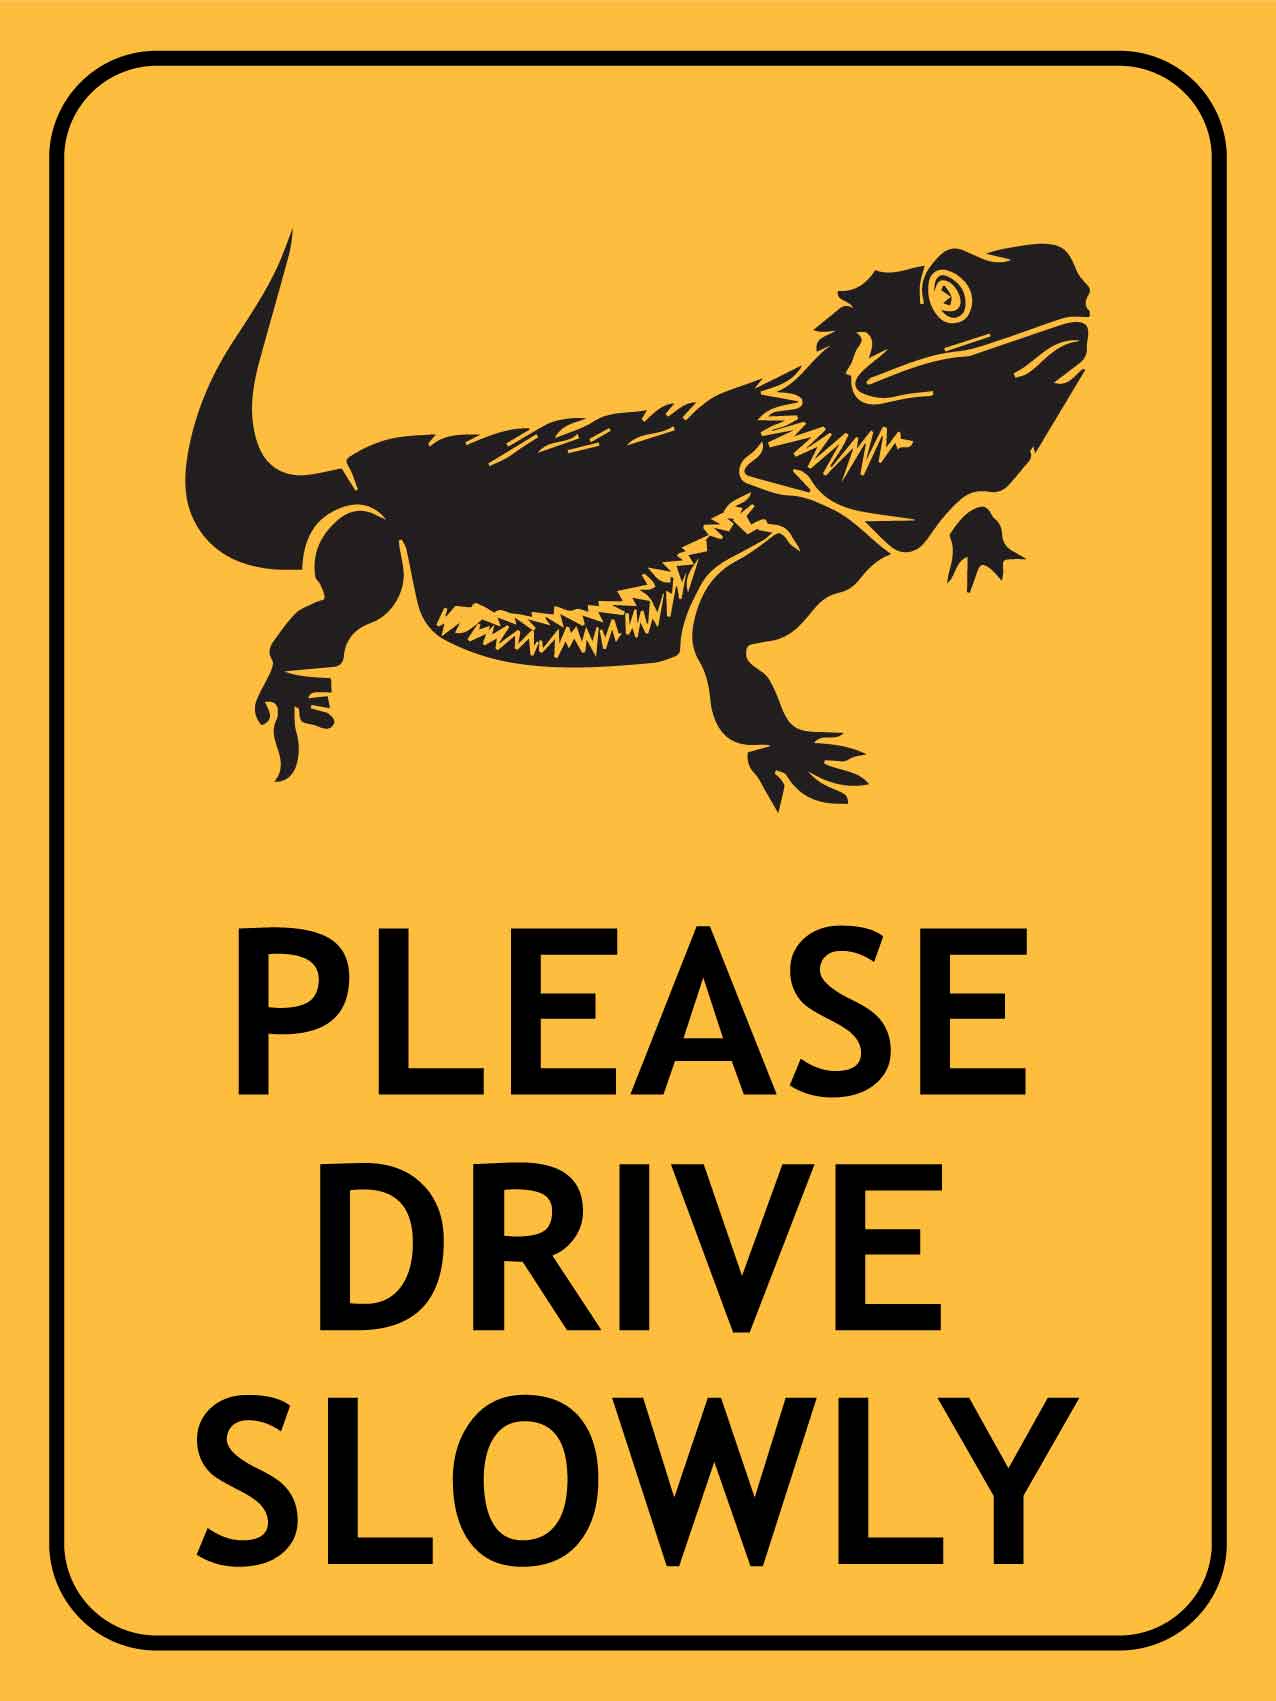 Frilled Neck Lizard Please Drive Slowly Sign